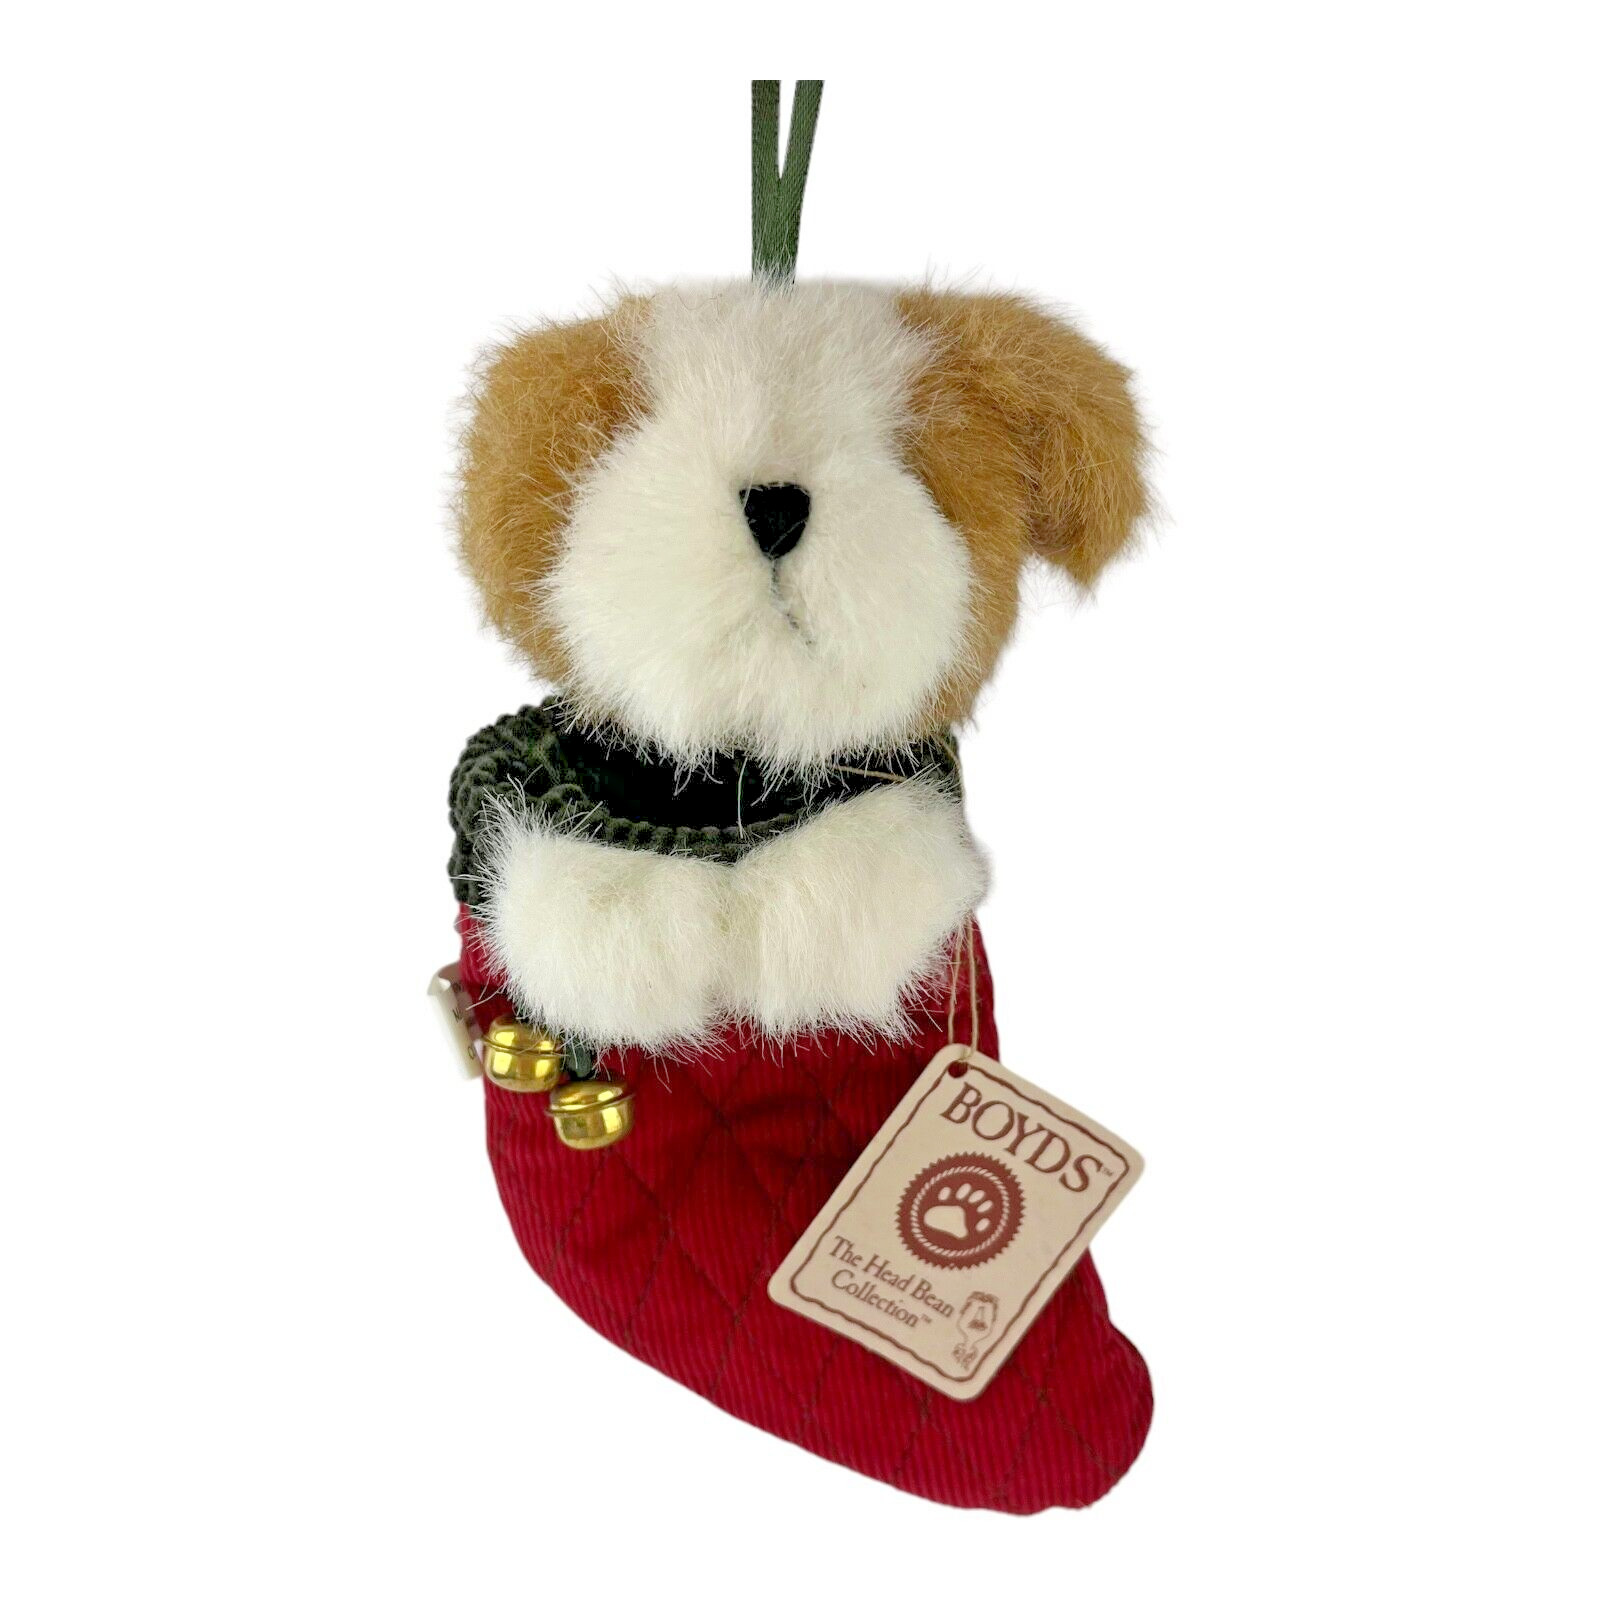 Boyds Bears Puppy Dog Stocking Christmas Ornament 6.5 Inch